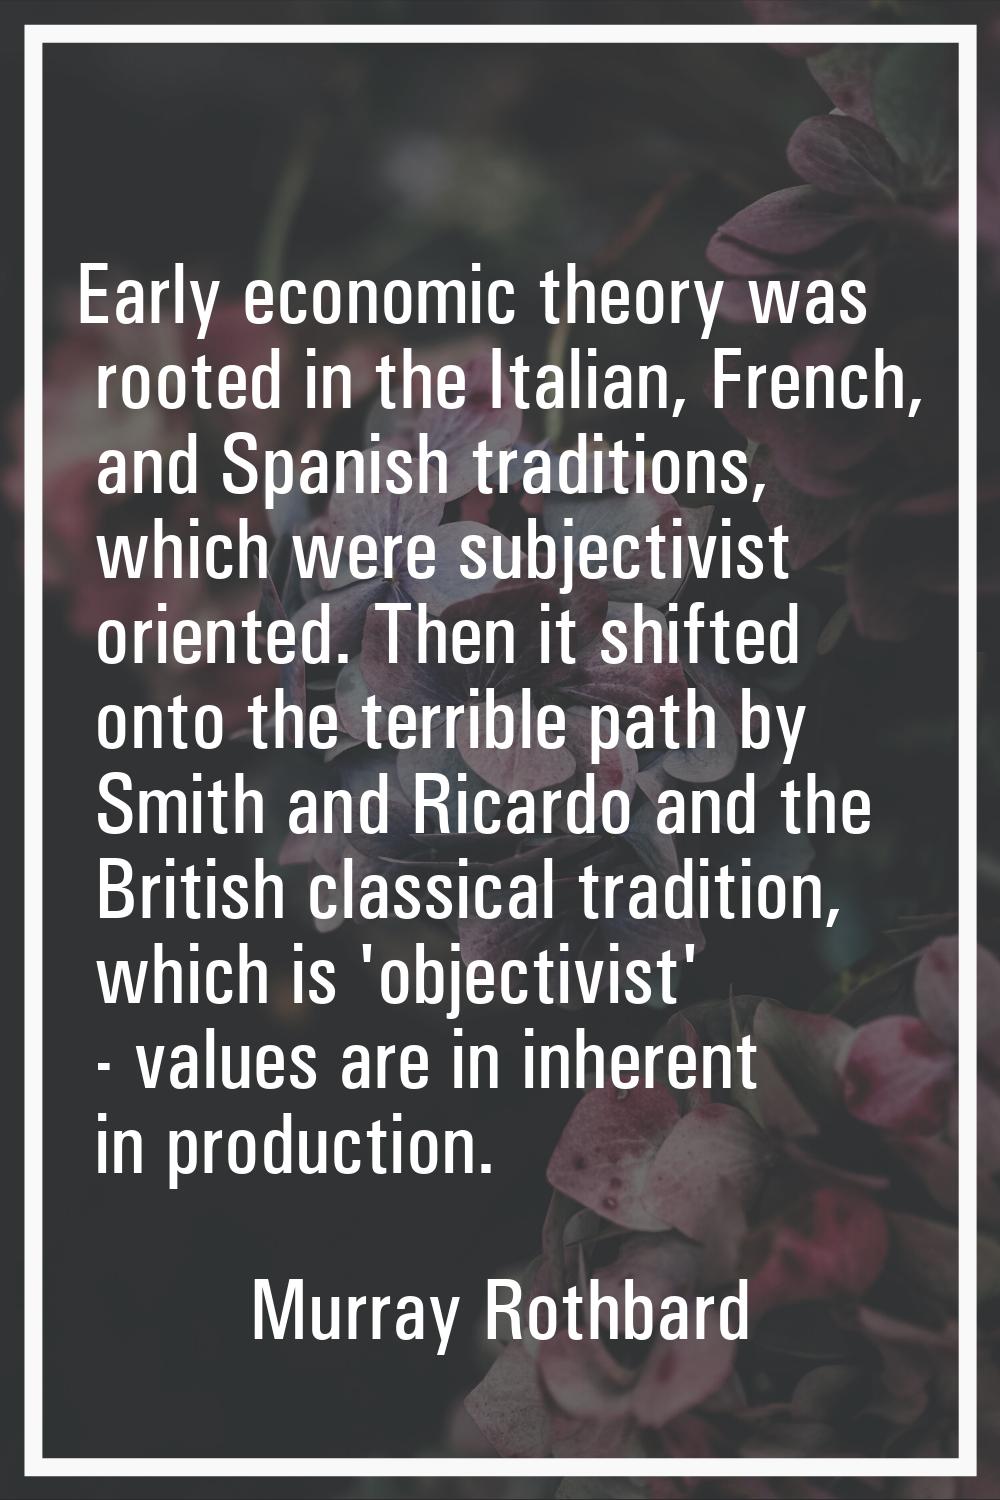 Early economic theory was rooted in the Italian, French, and Spanish traditions, which were subject